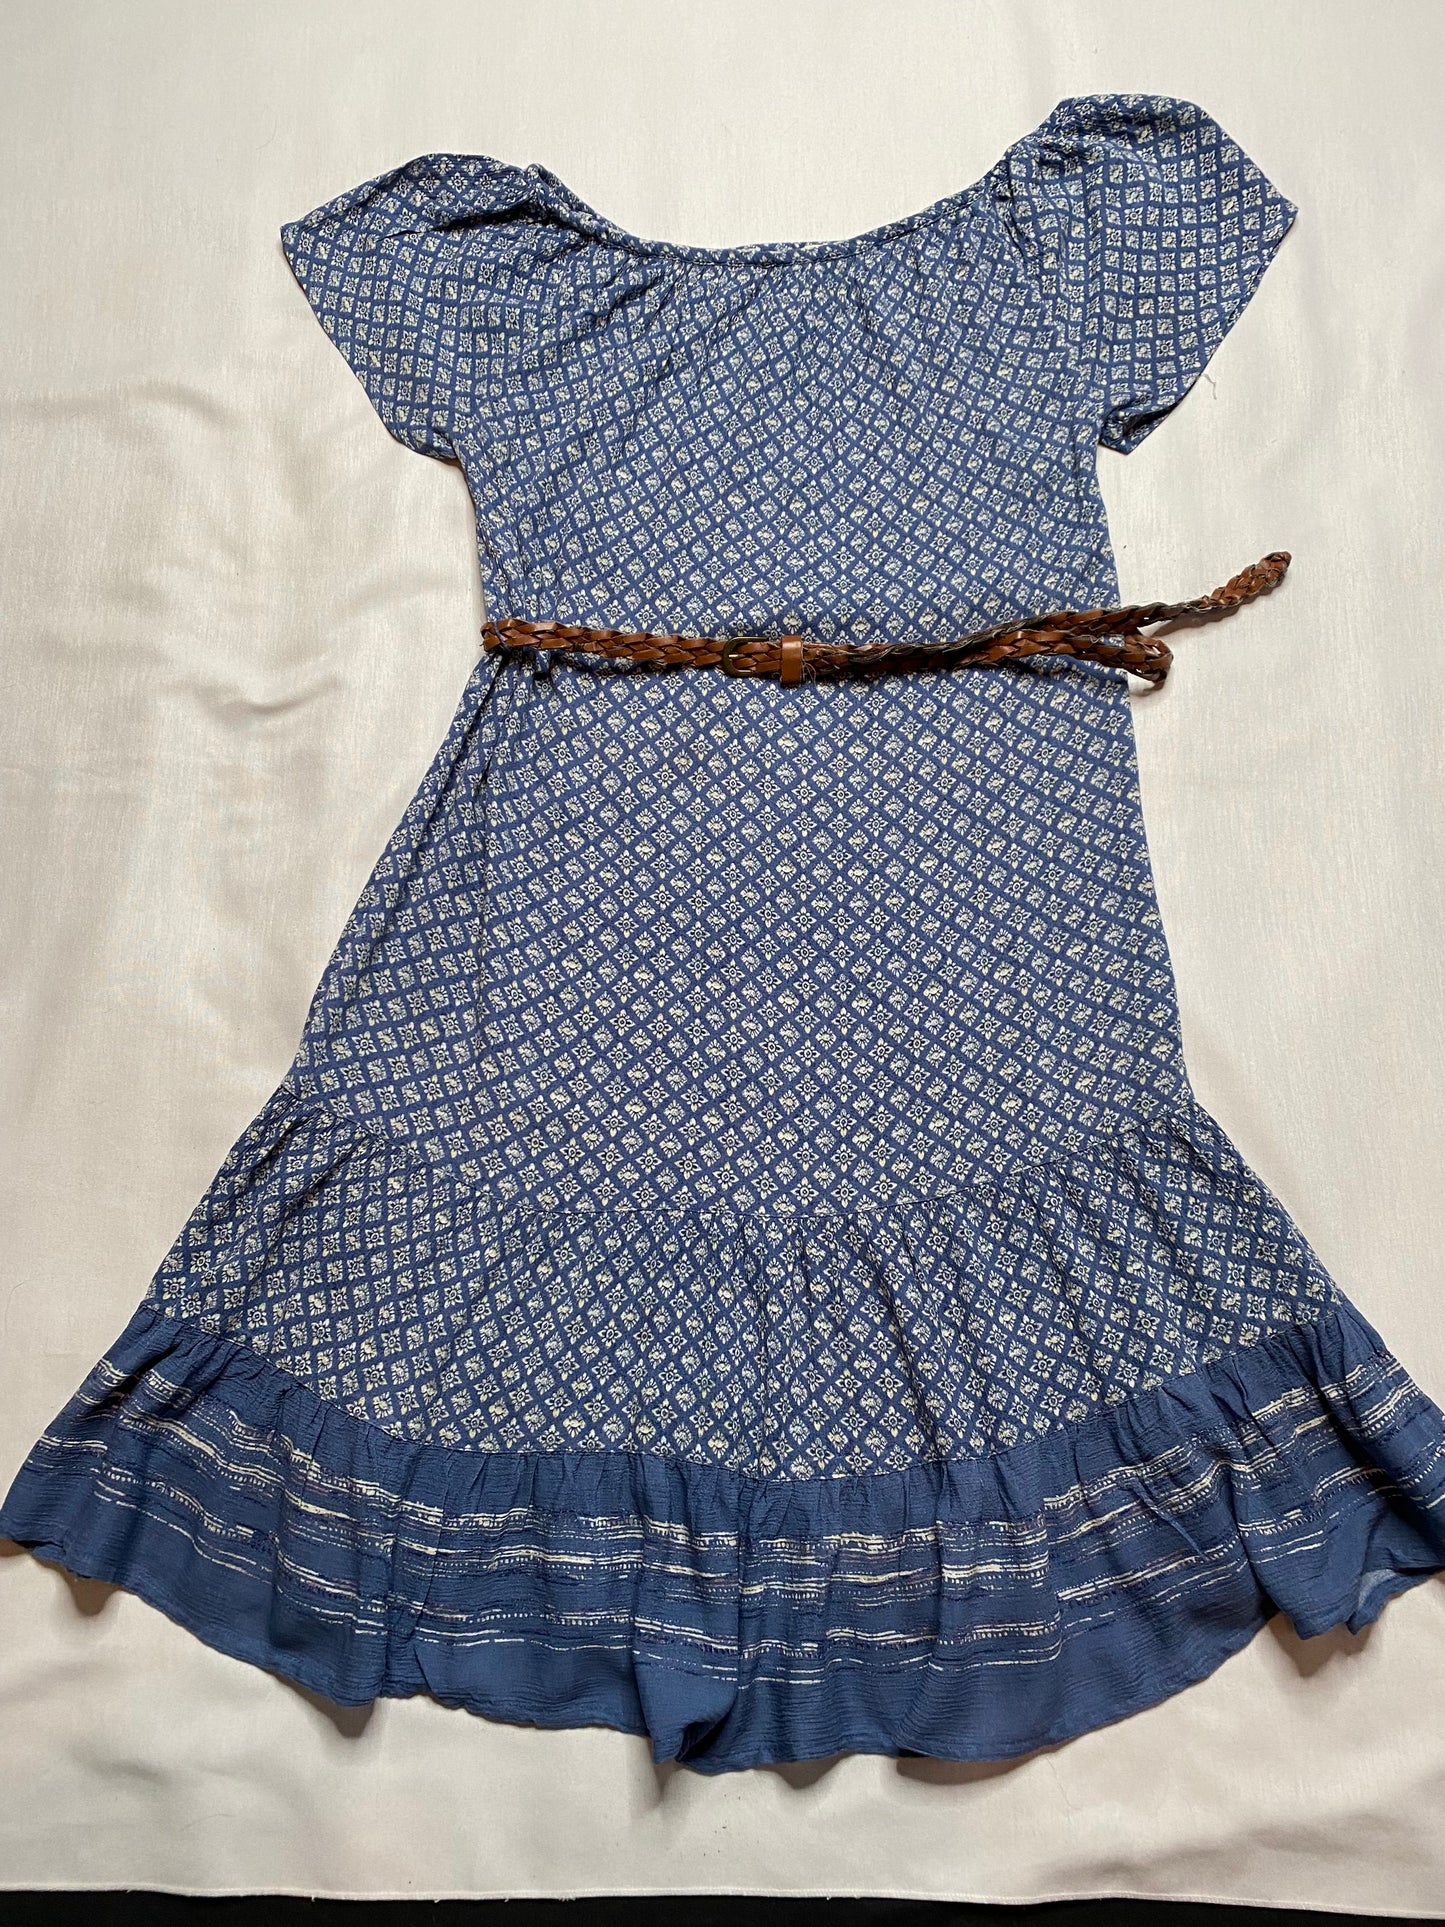 Fat face - S 8 - blue white crinkle gypsy knee length belted dress